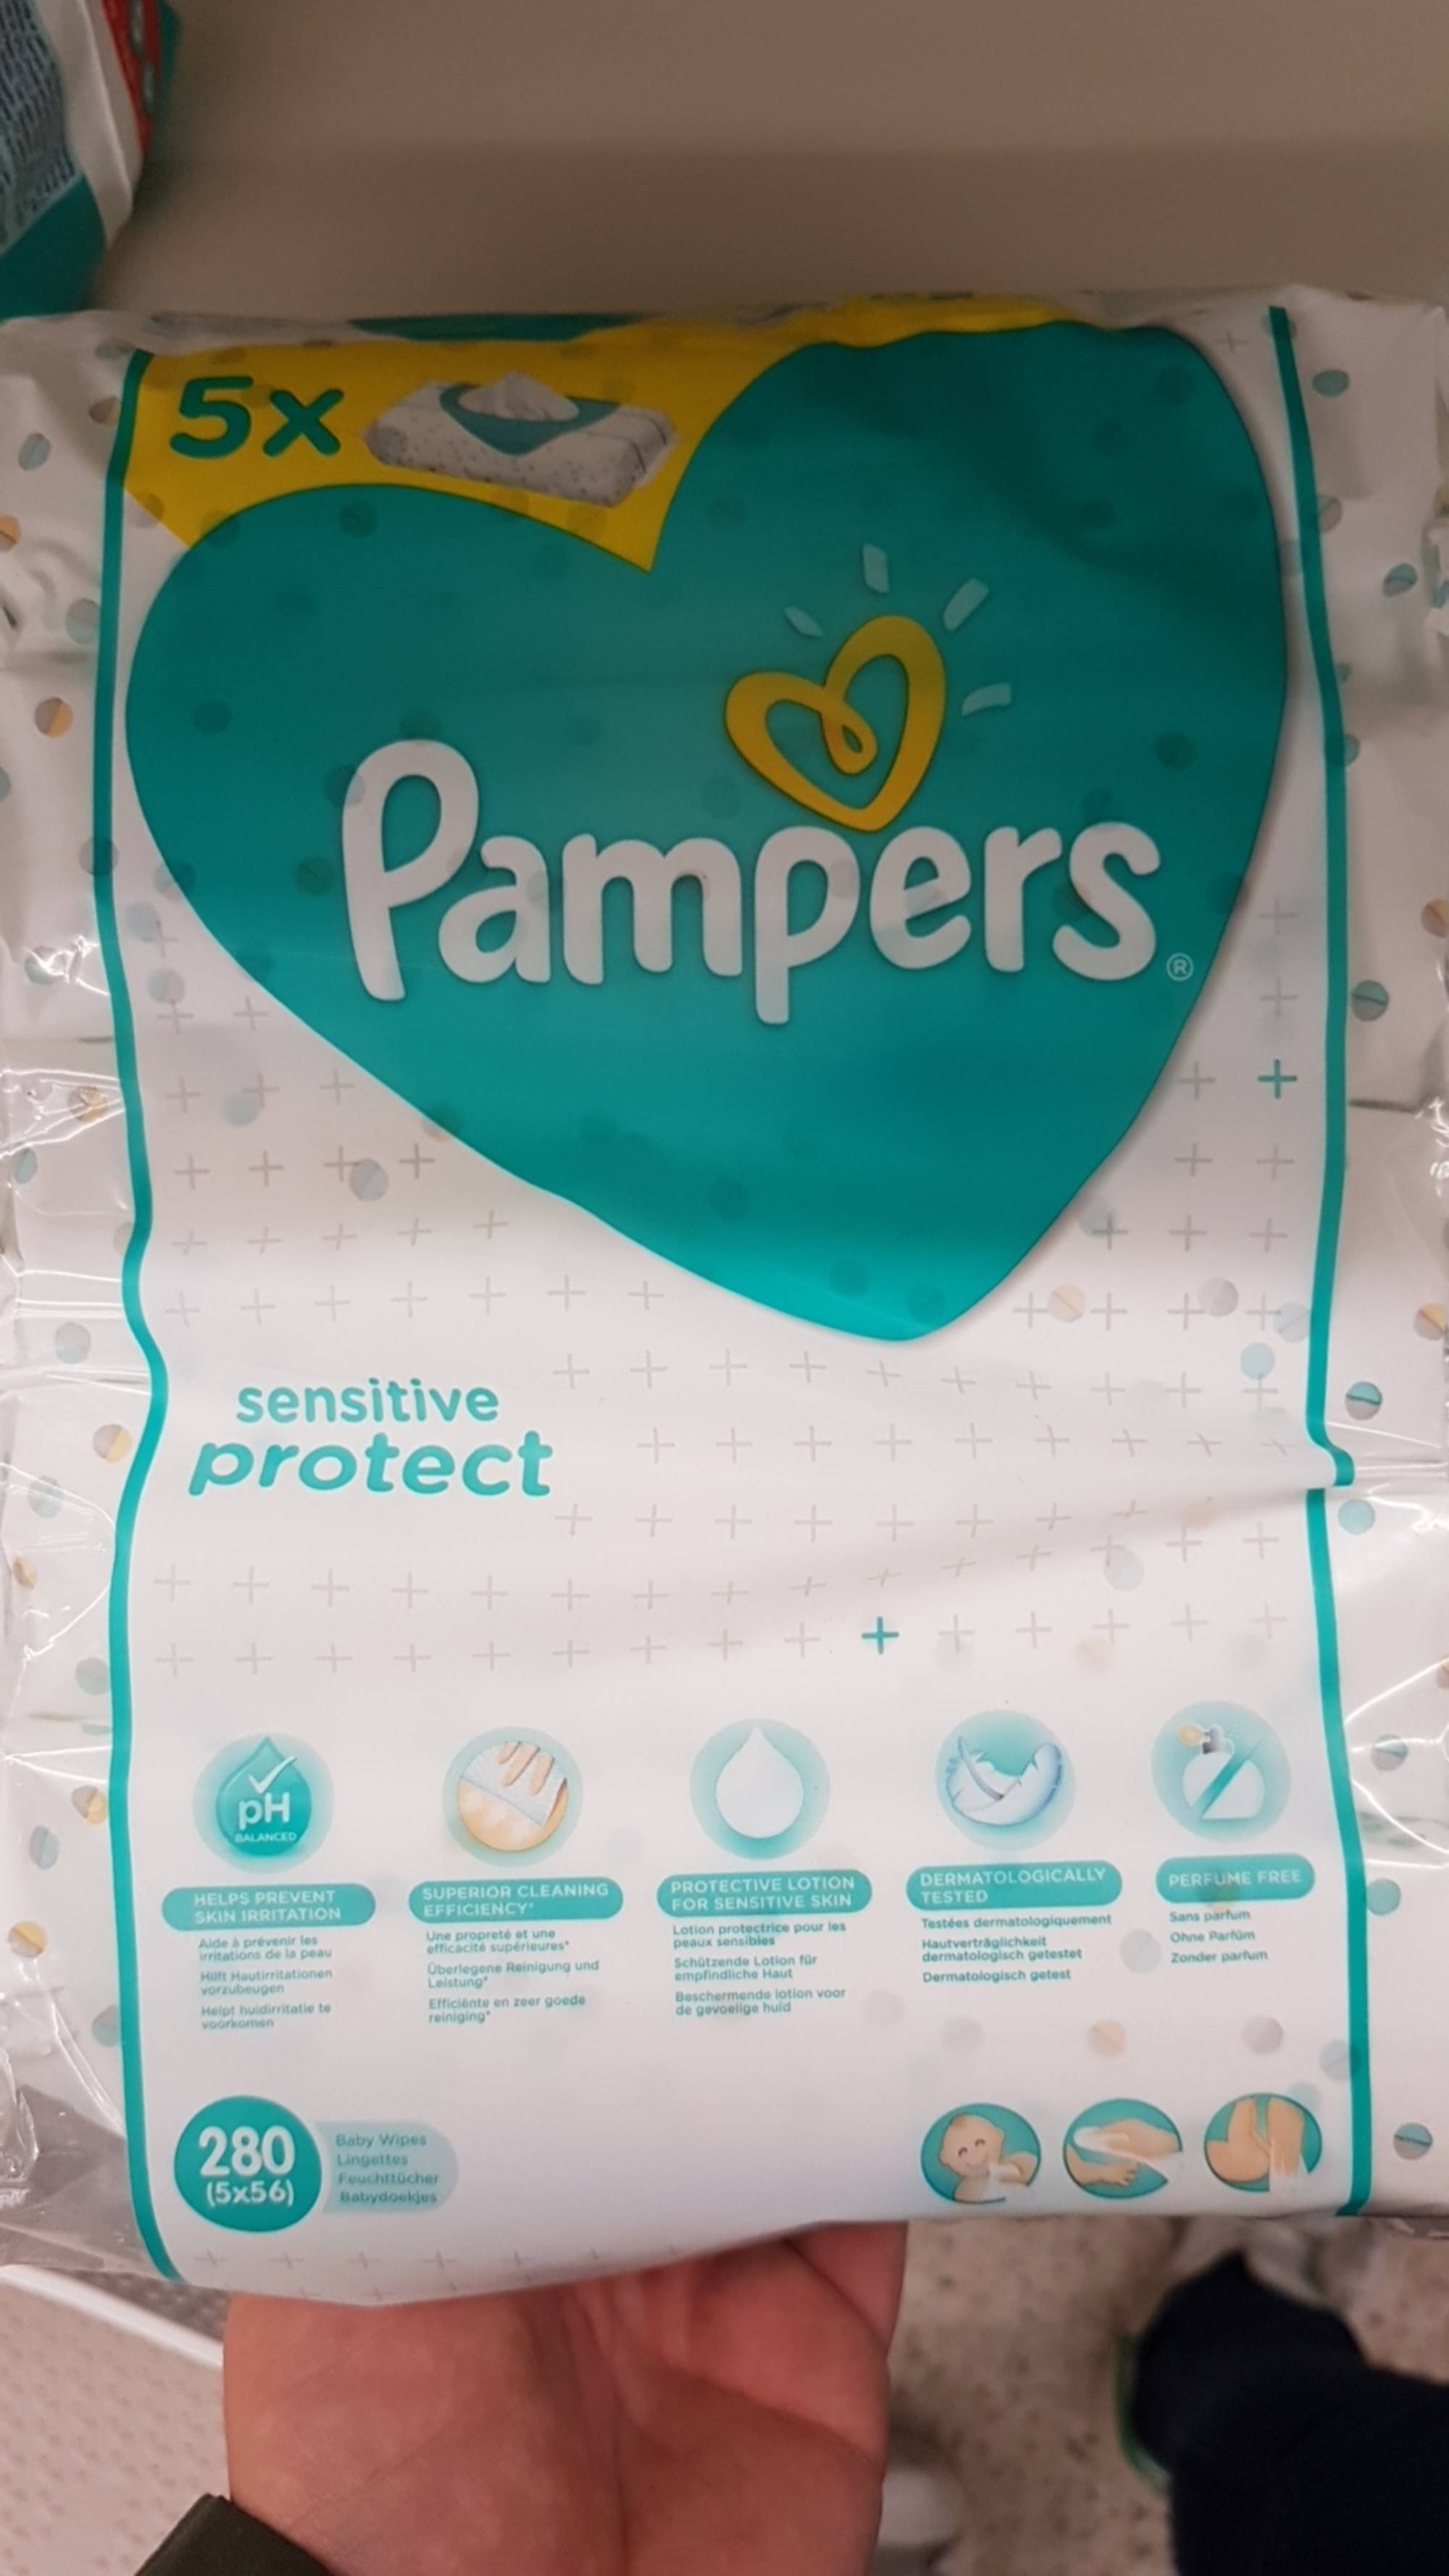 PAMPERS - Sensitive protect - Baby wipes